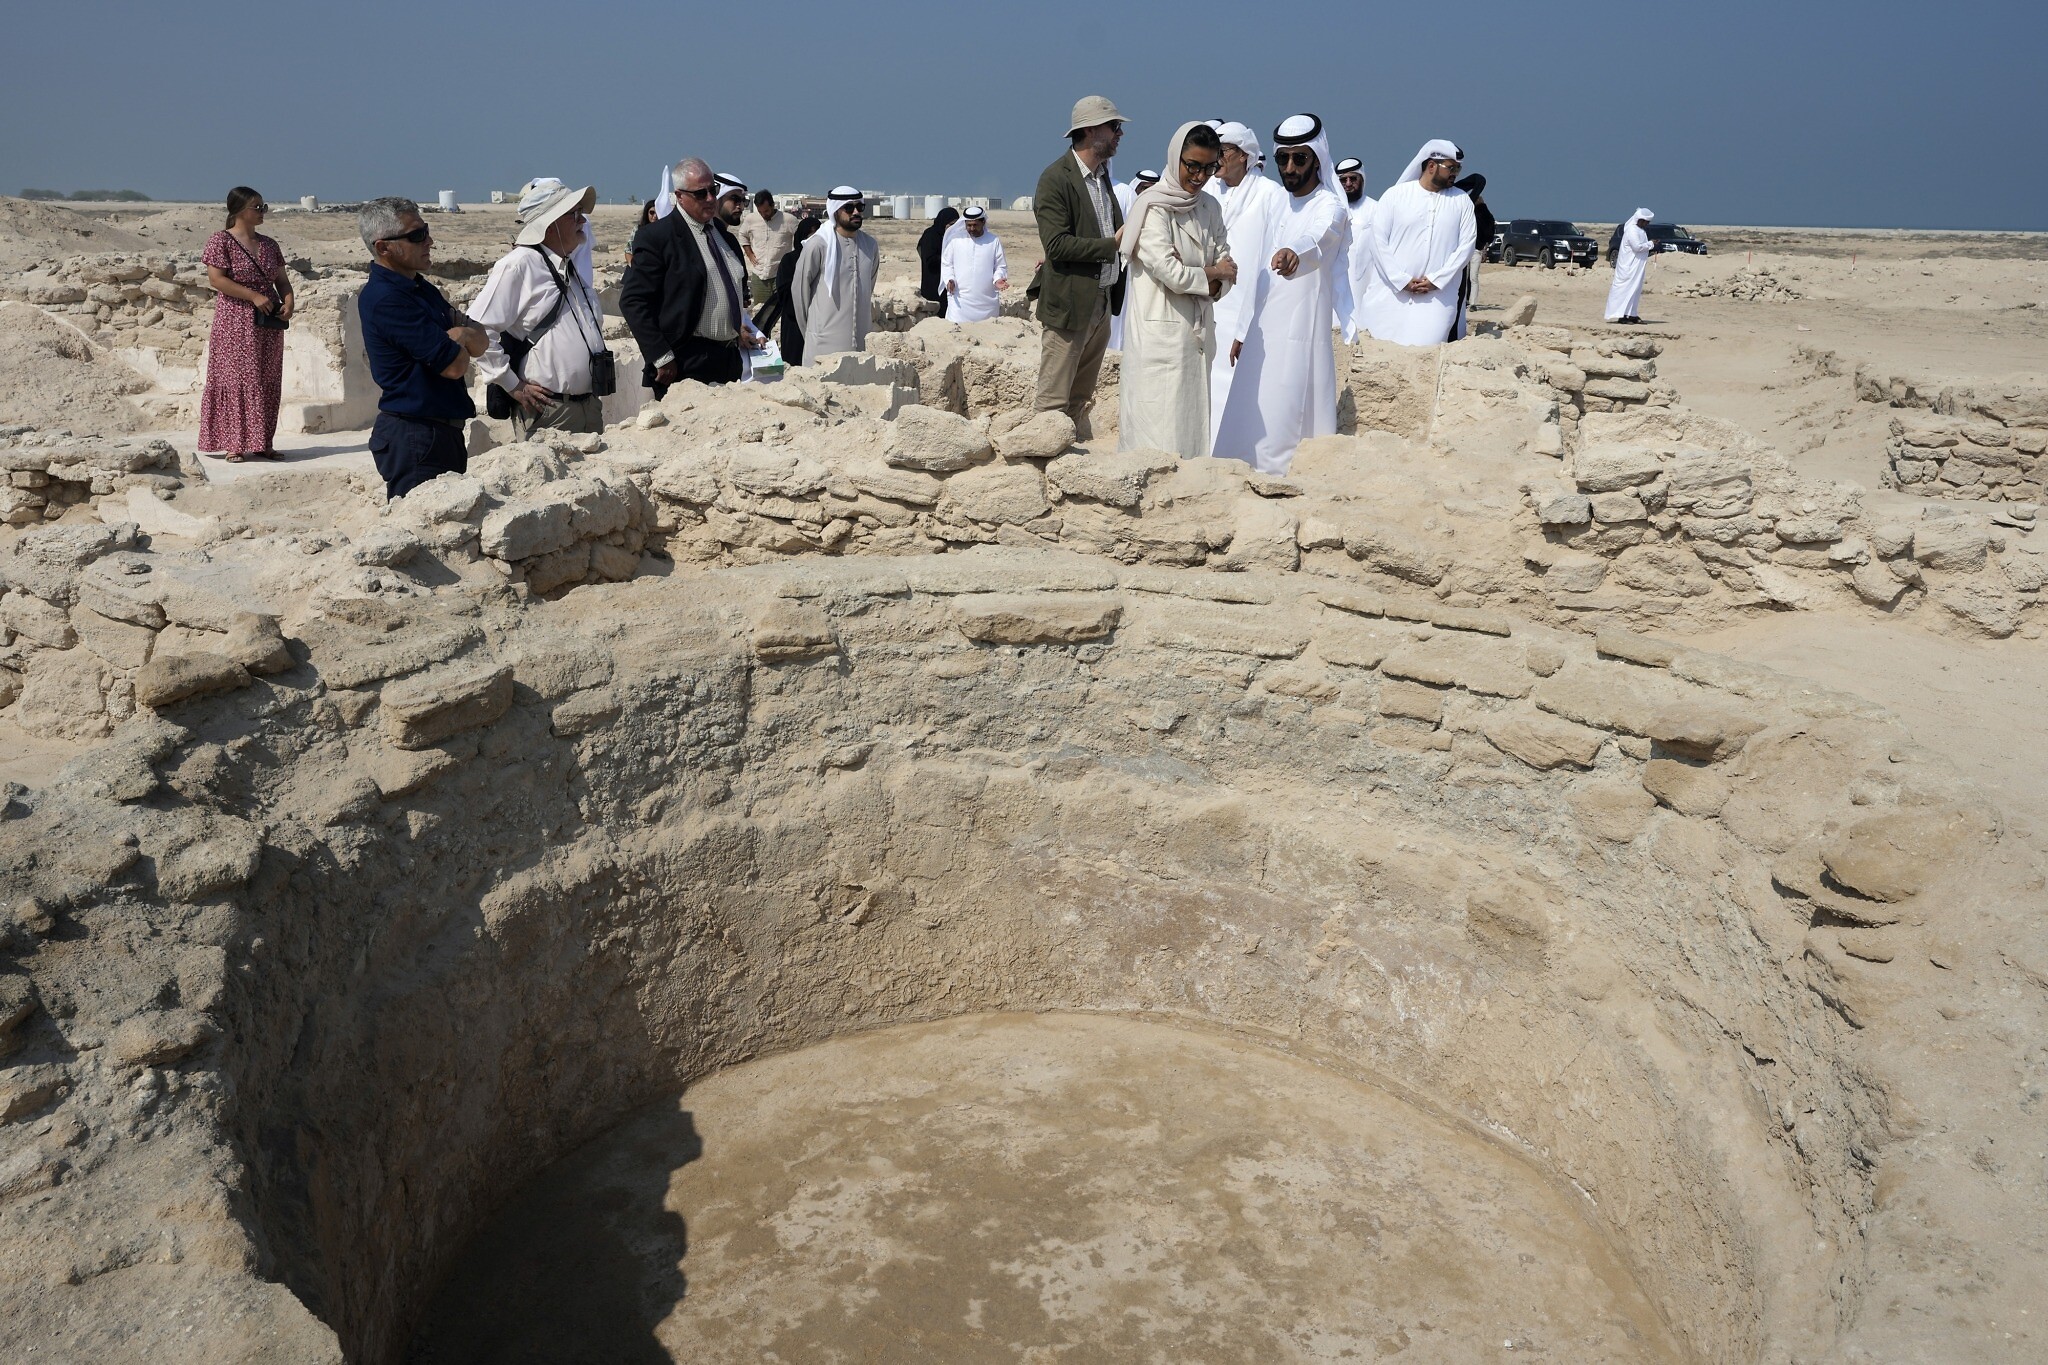 Sands of time Christian monastery, possibly pre-dating Islam, found in UAE dunes The Times of Israel